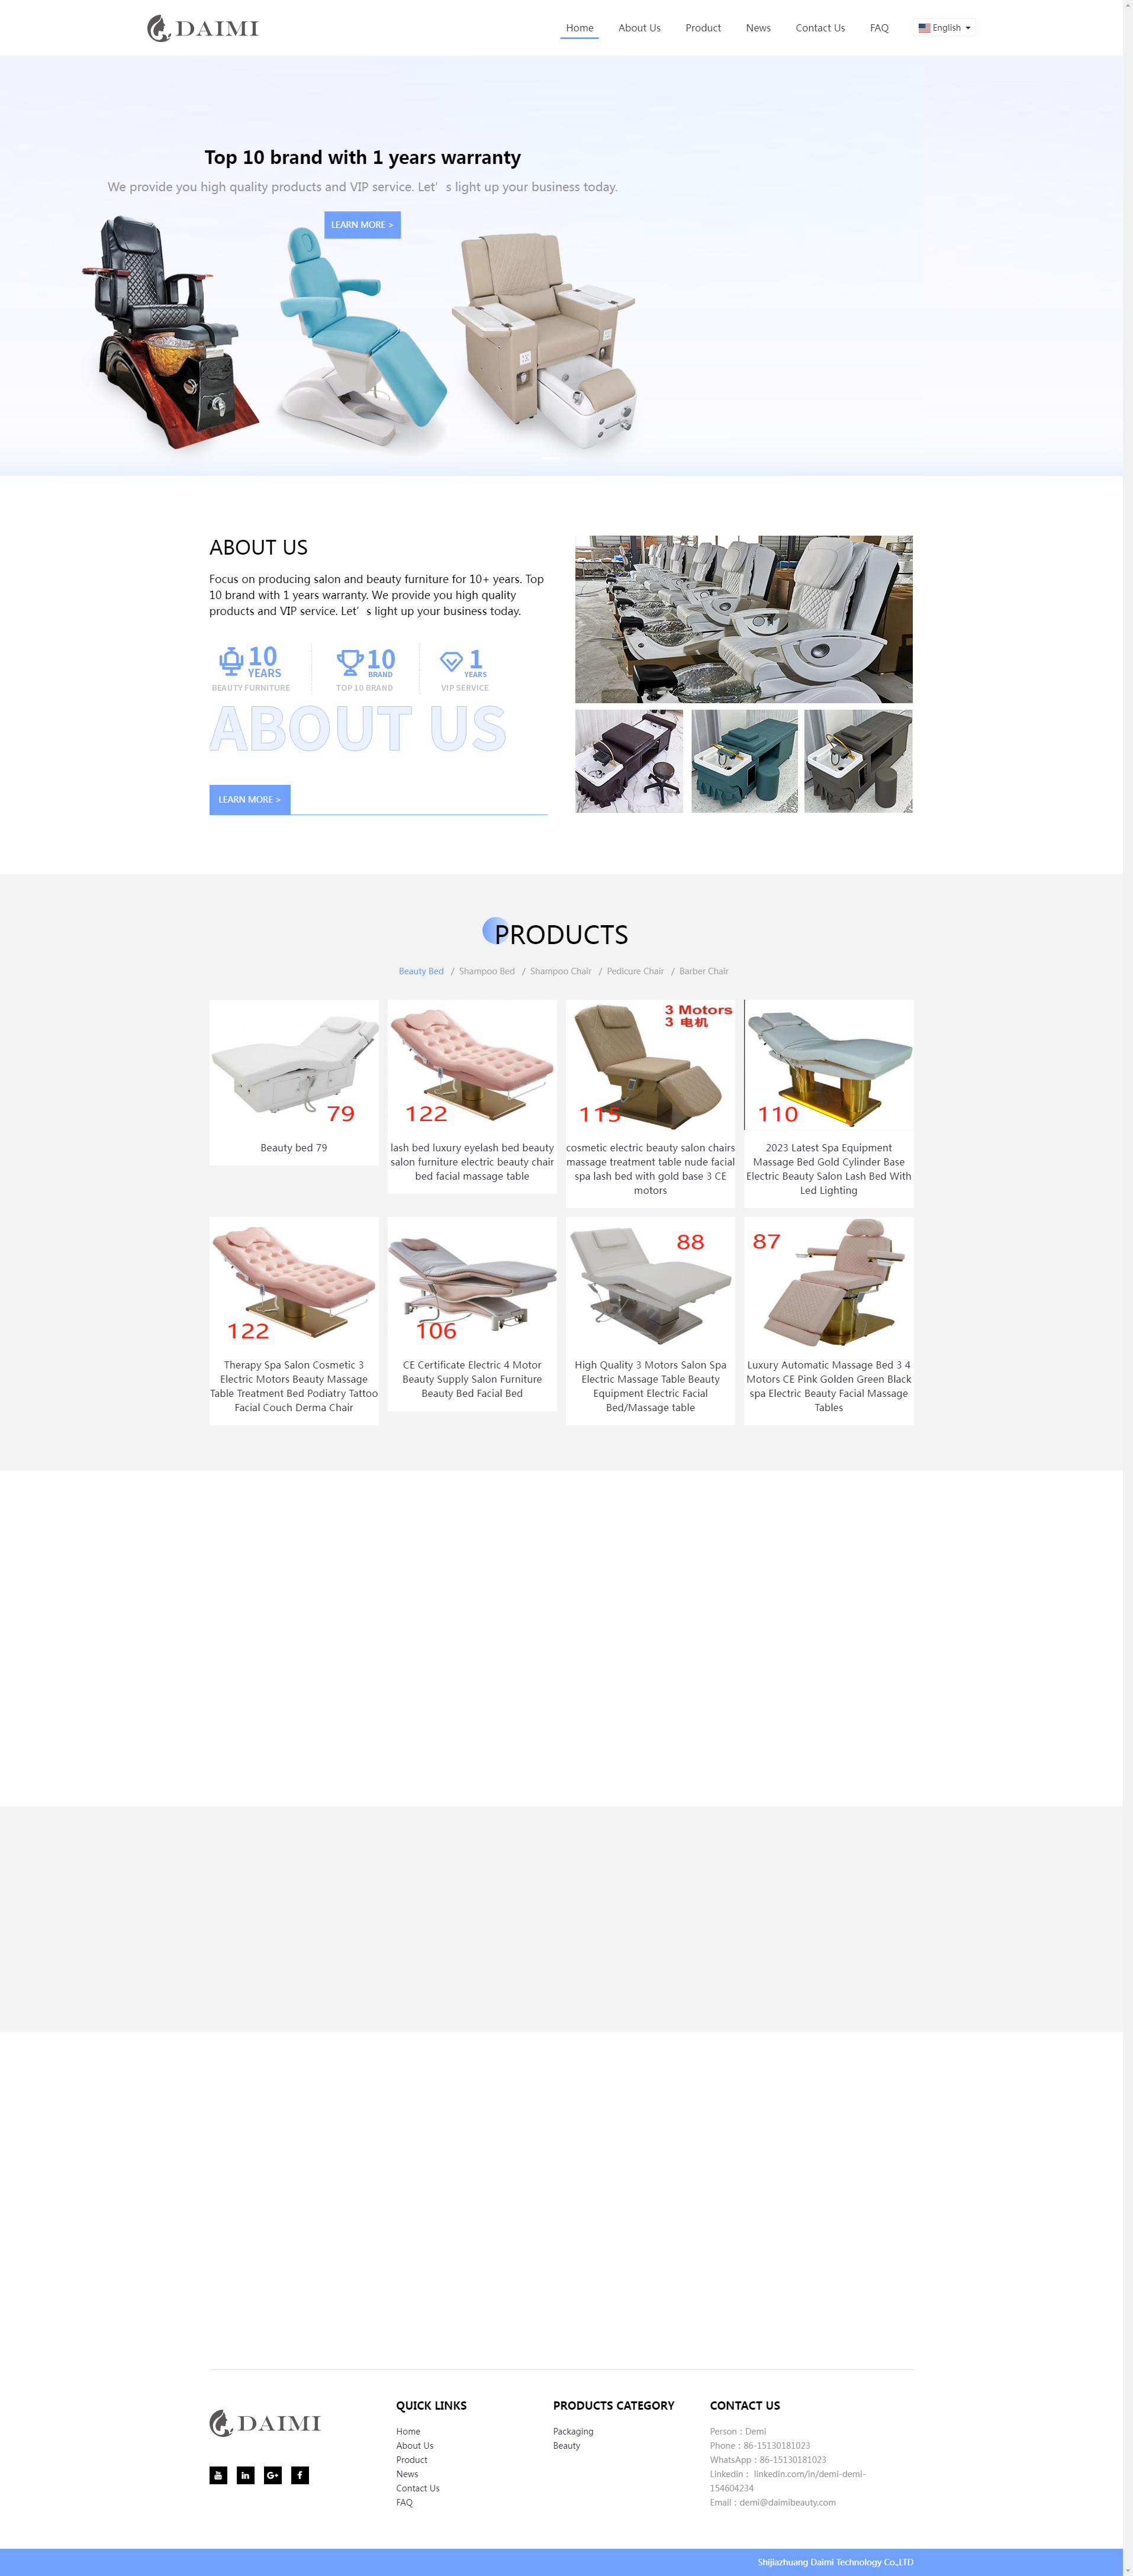 Shampoo Bed, Beauty & Salon Furniture Suppliers _ .png